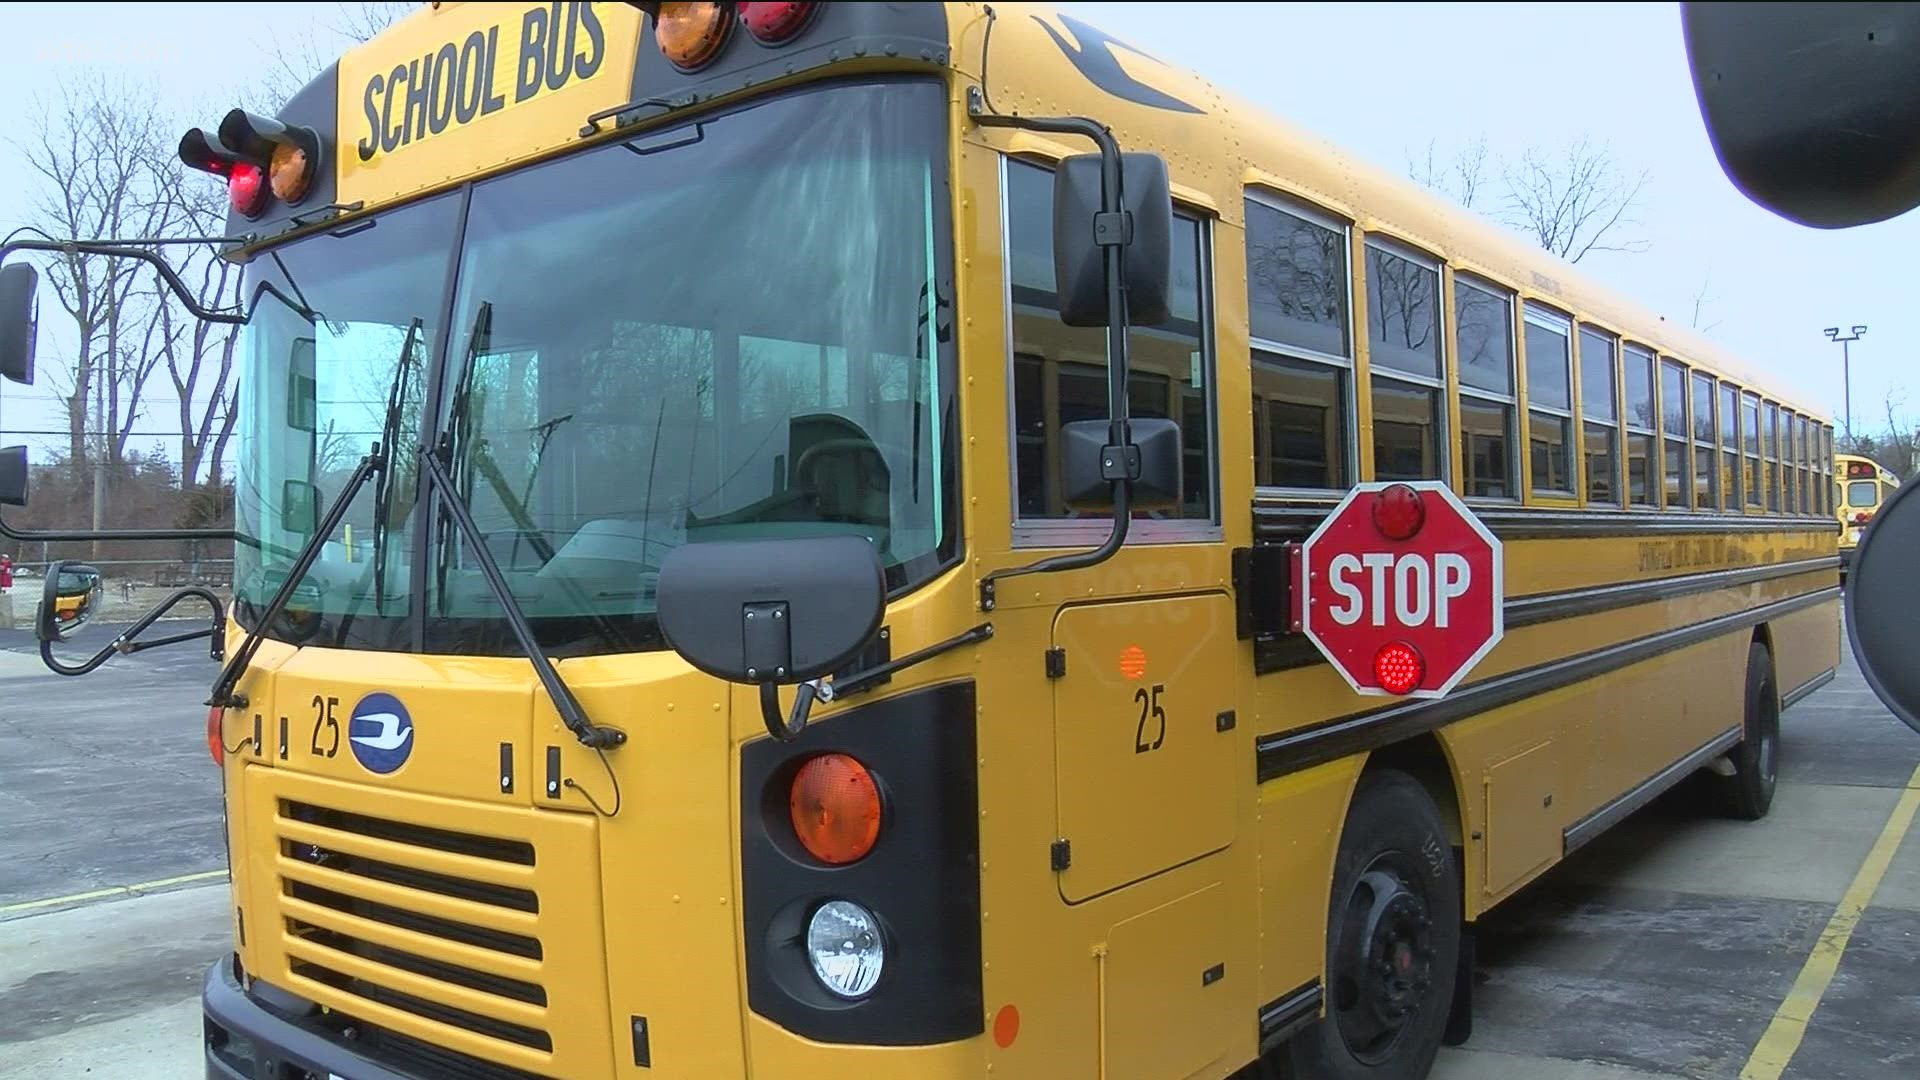 Parents and school officials are concerned as drivers passing by stopped school buses has been a problem.